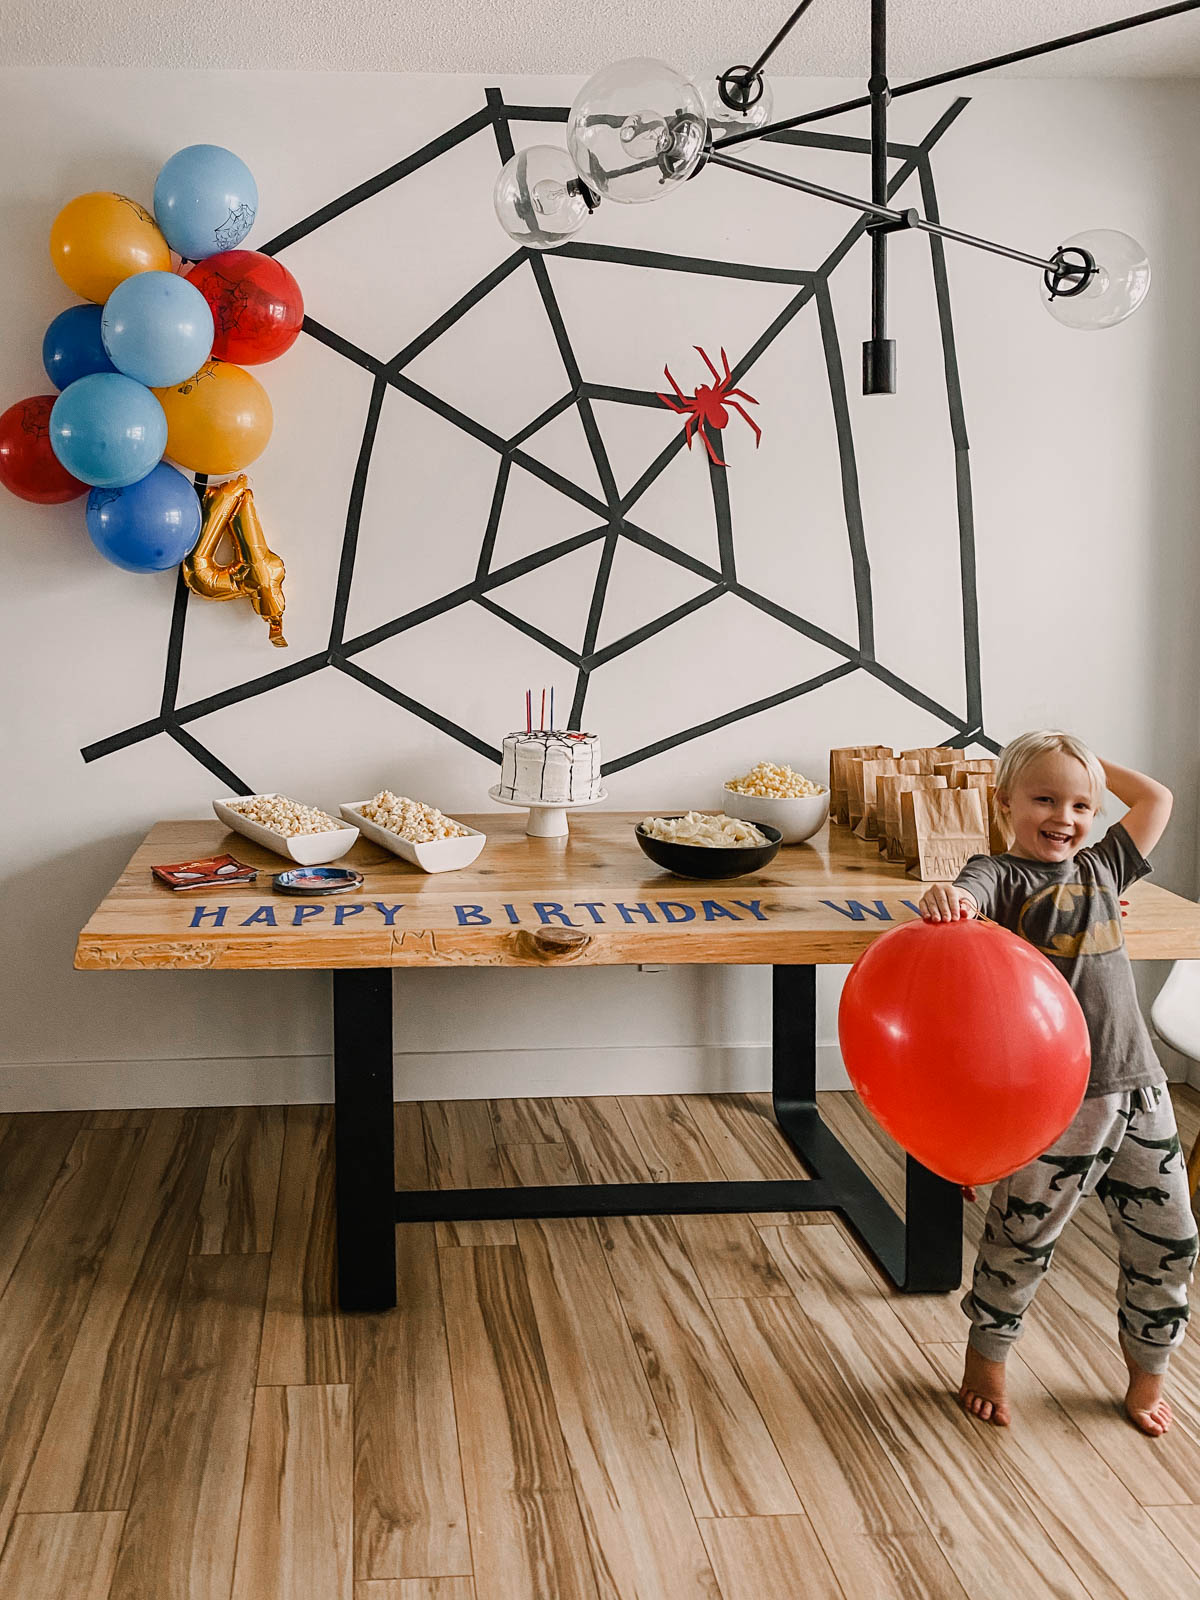 DIY Spiderman birthday party decor- large spiderweb backdrop and some balloons